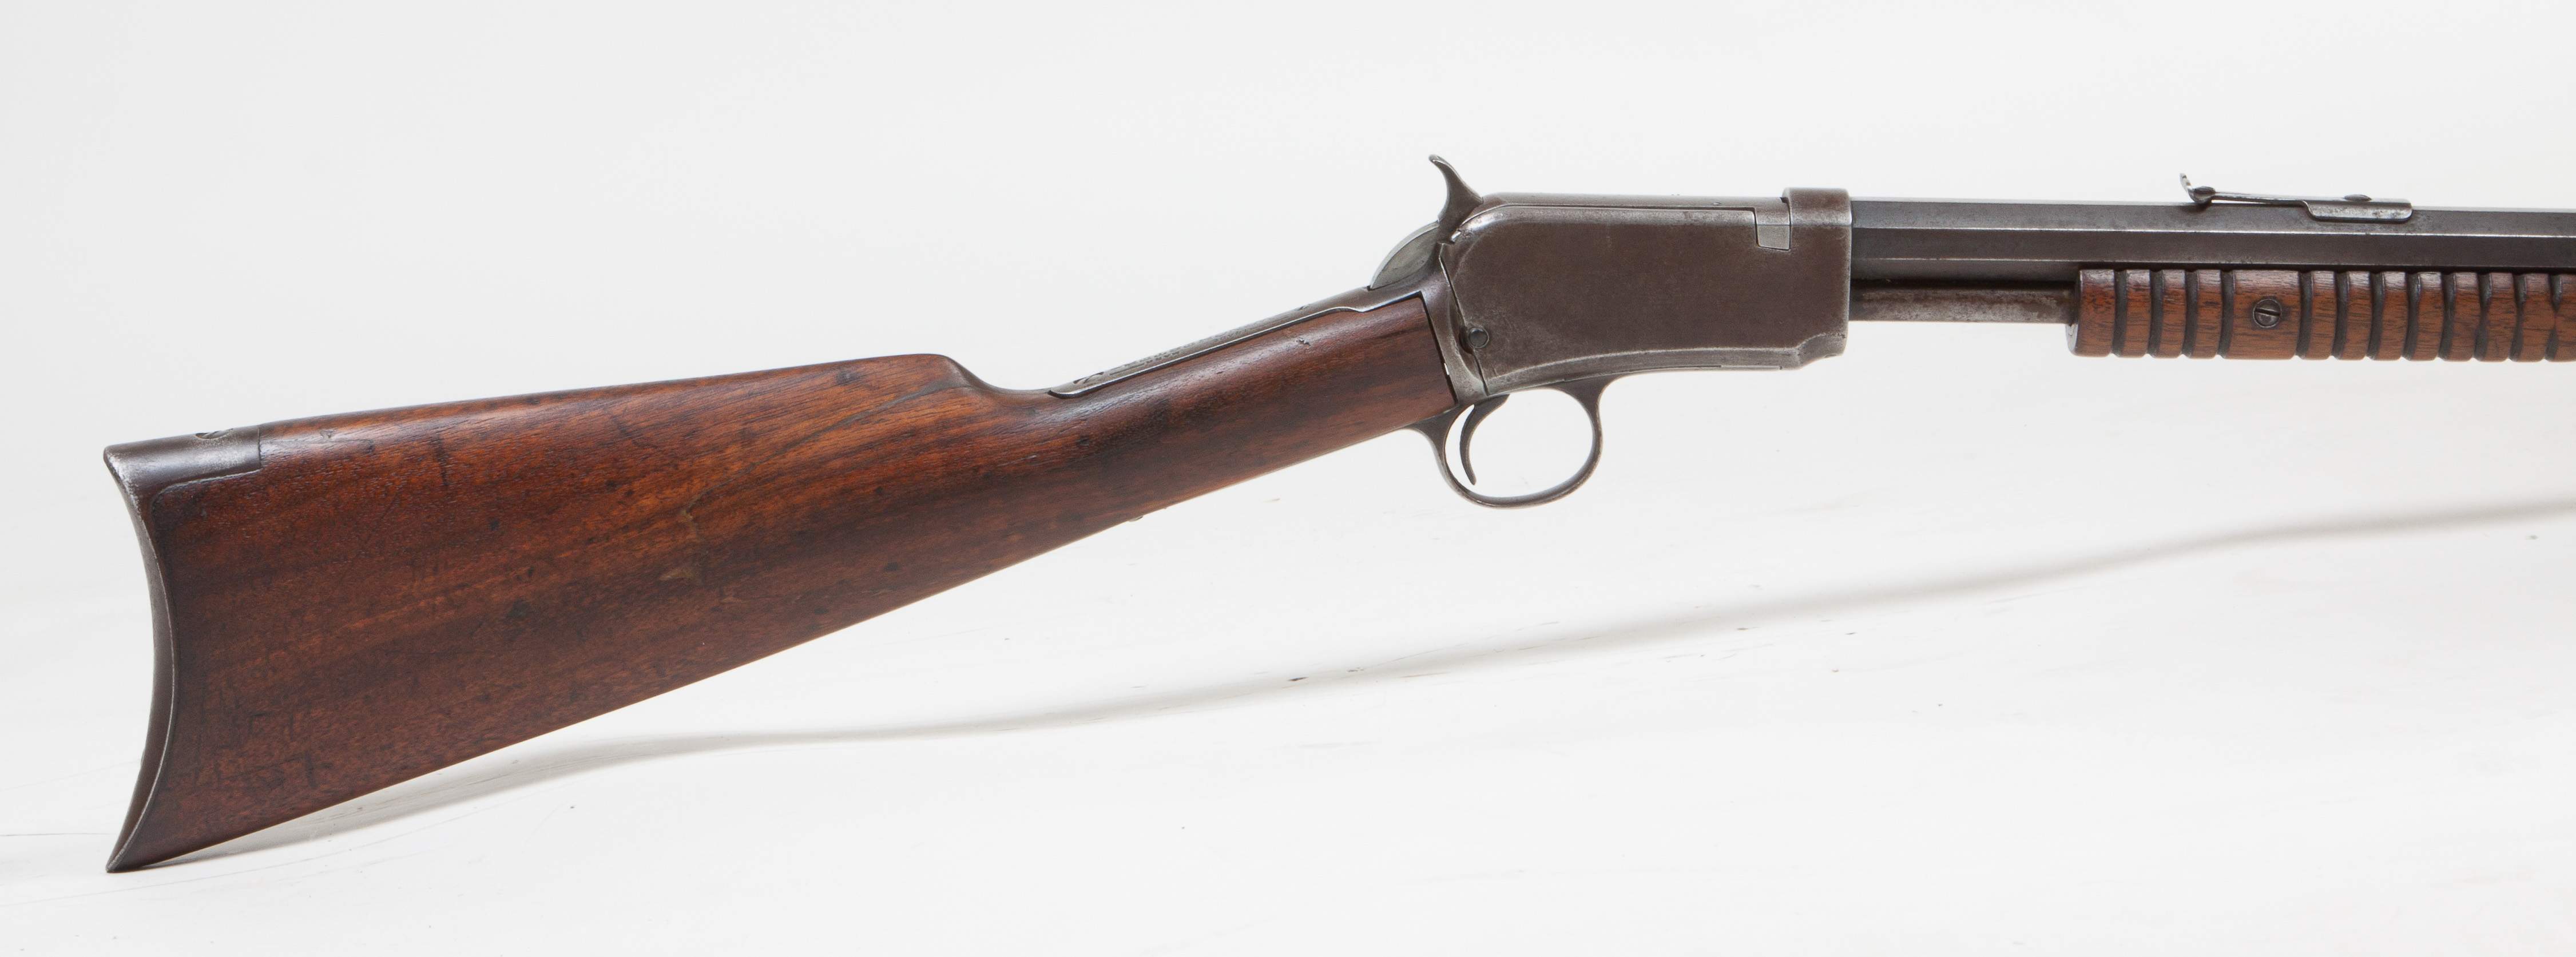 winchester model 1890 serial numbers